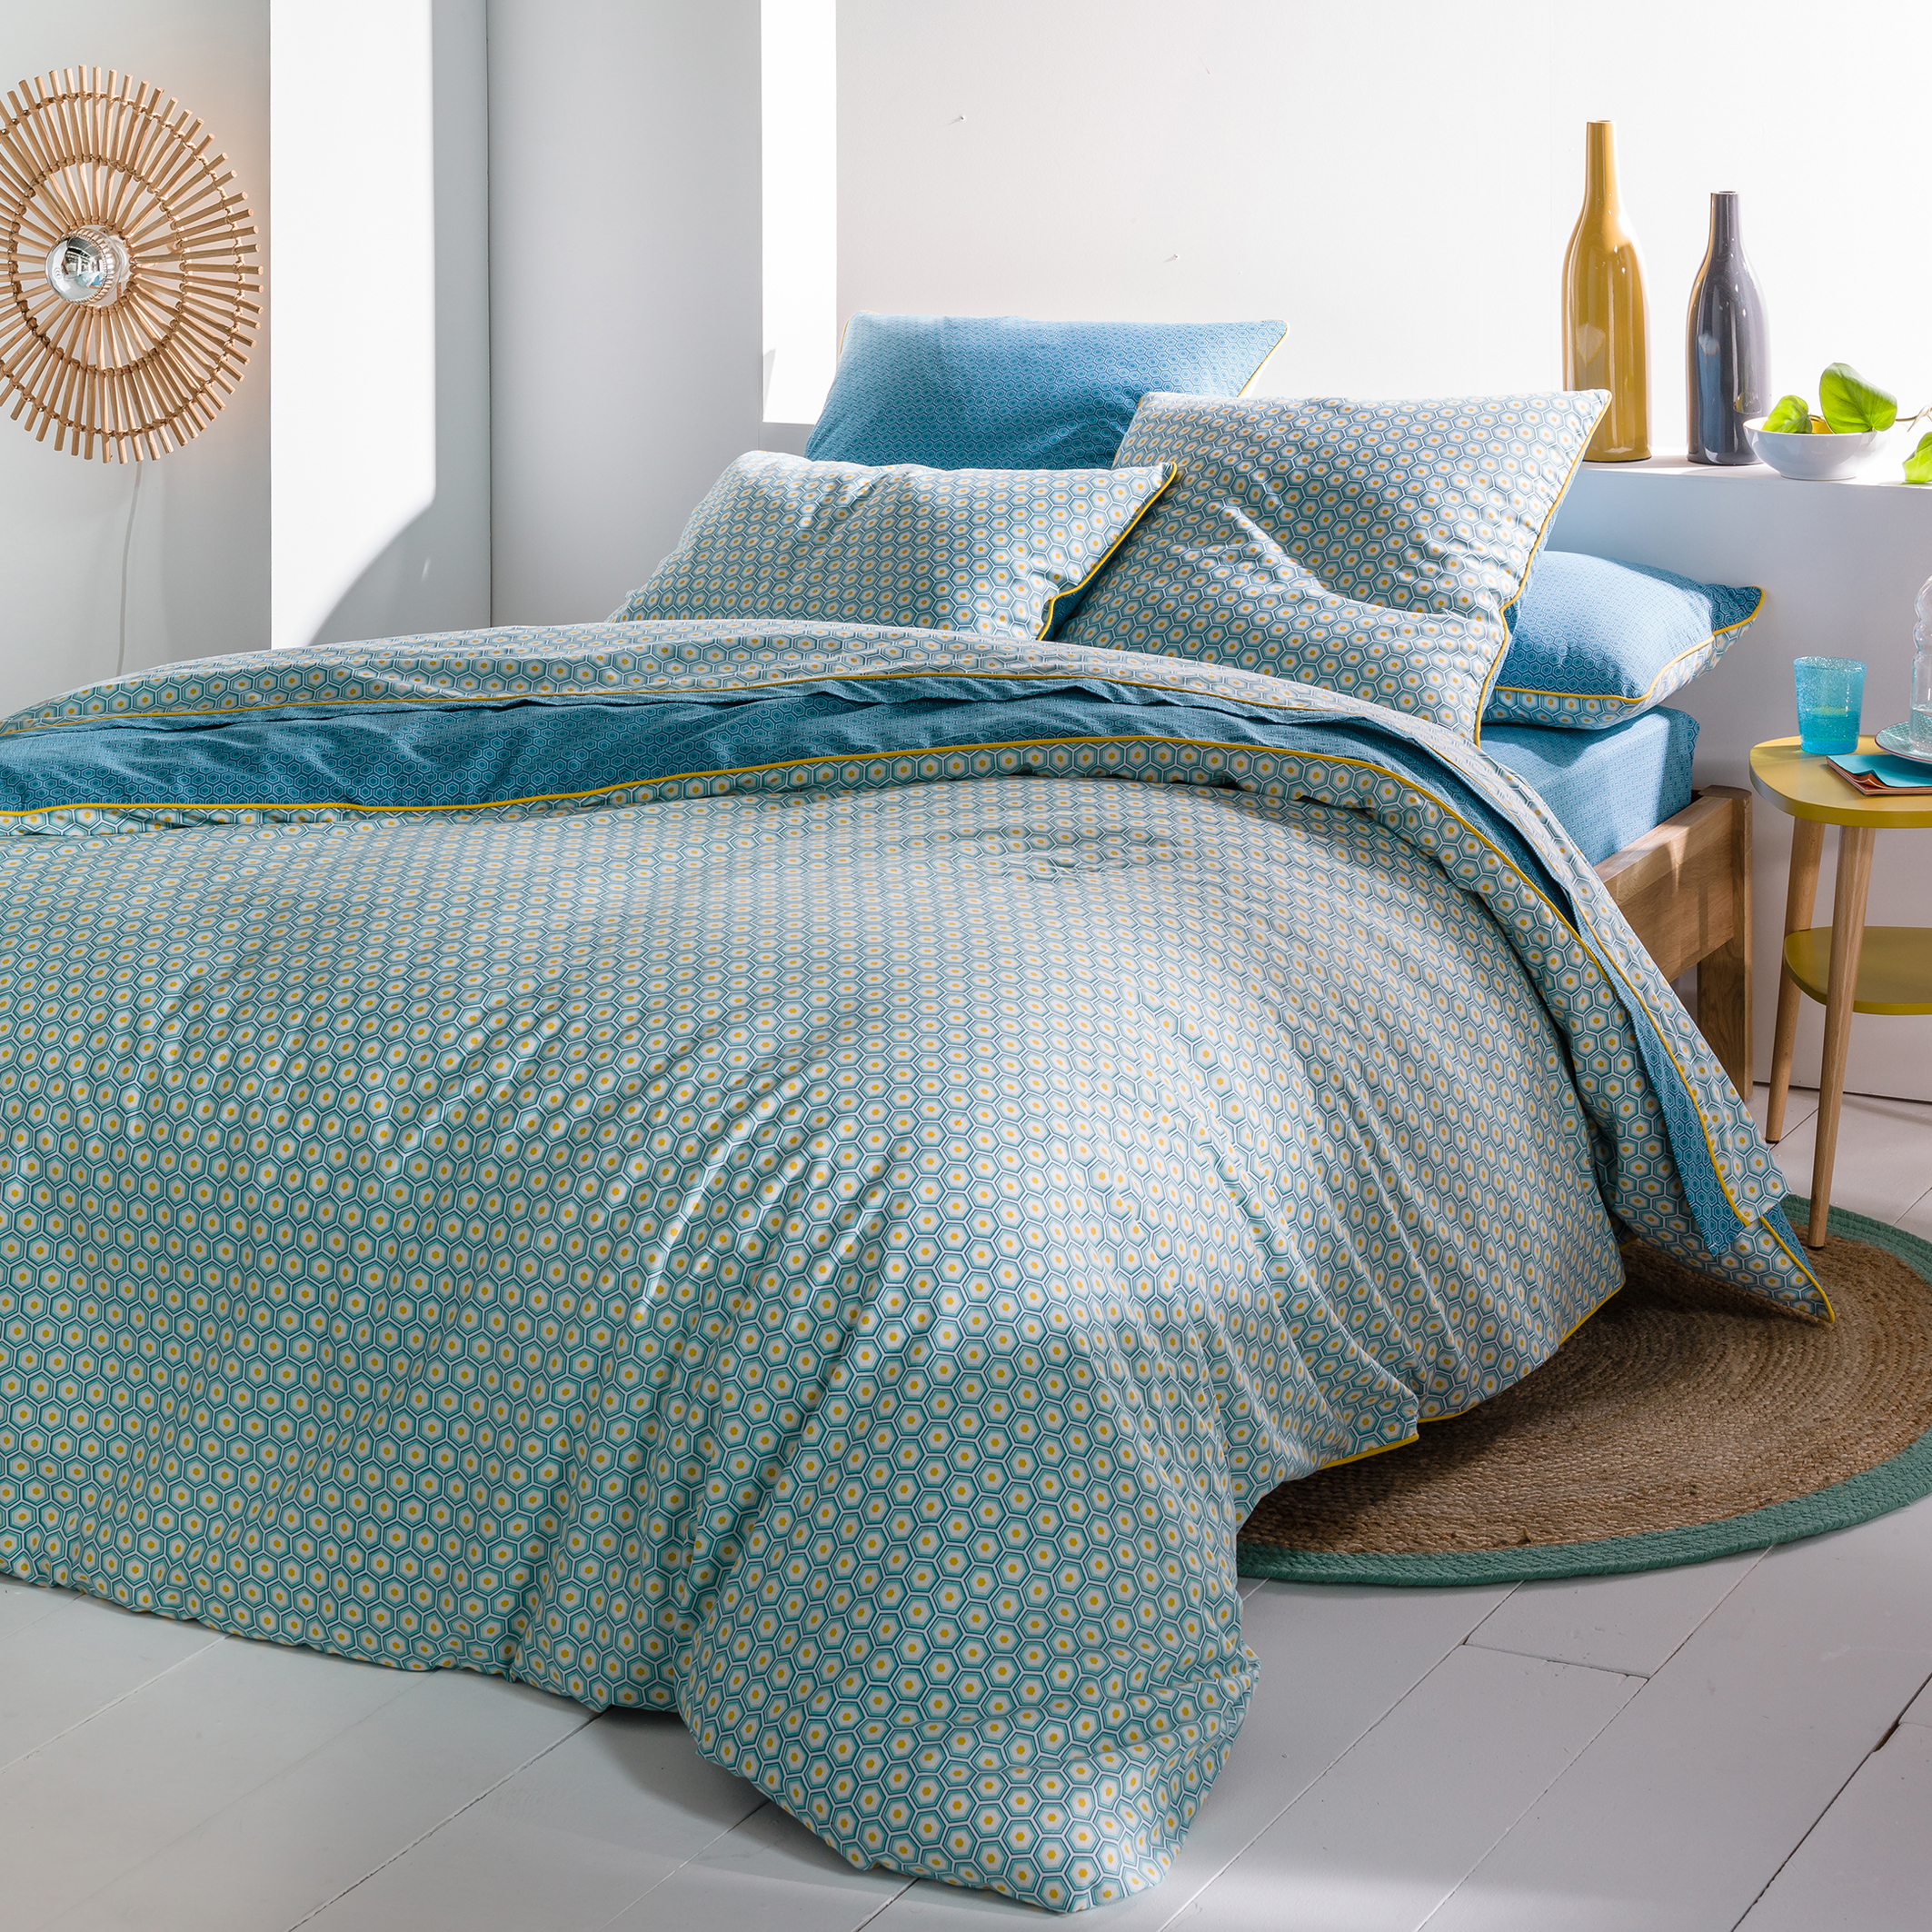 Pop Mozaic Tiled Cotton Duvet Cover, What Is The Finished Size Of A Queen Duvet Cover